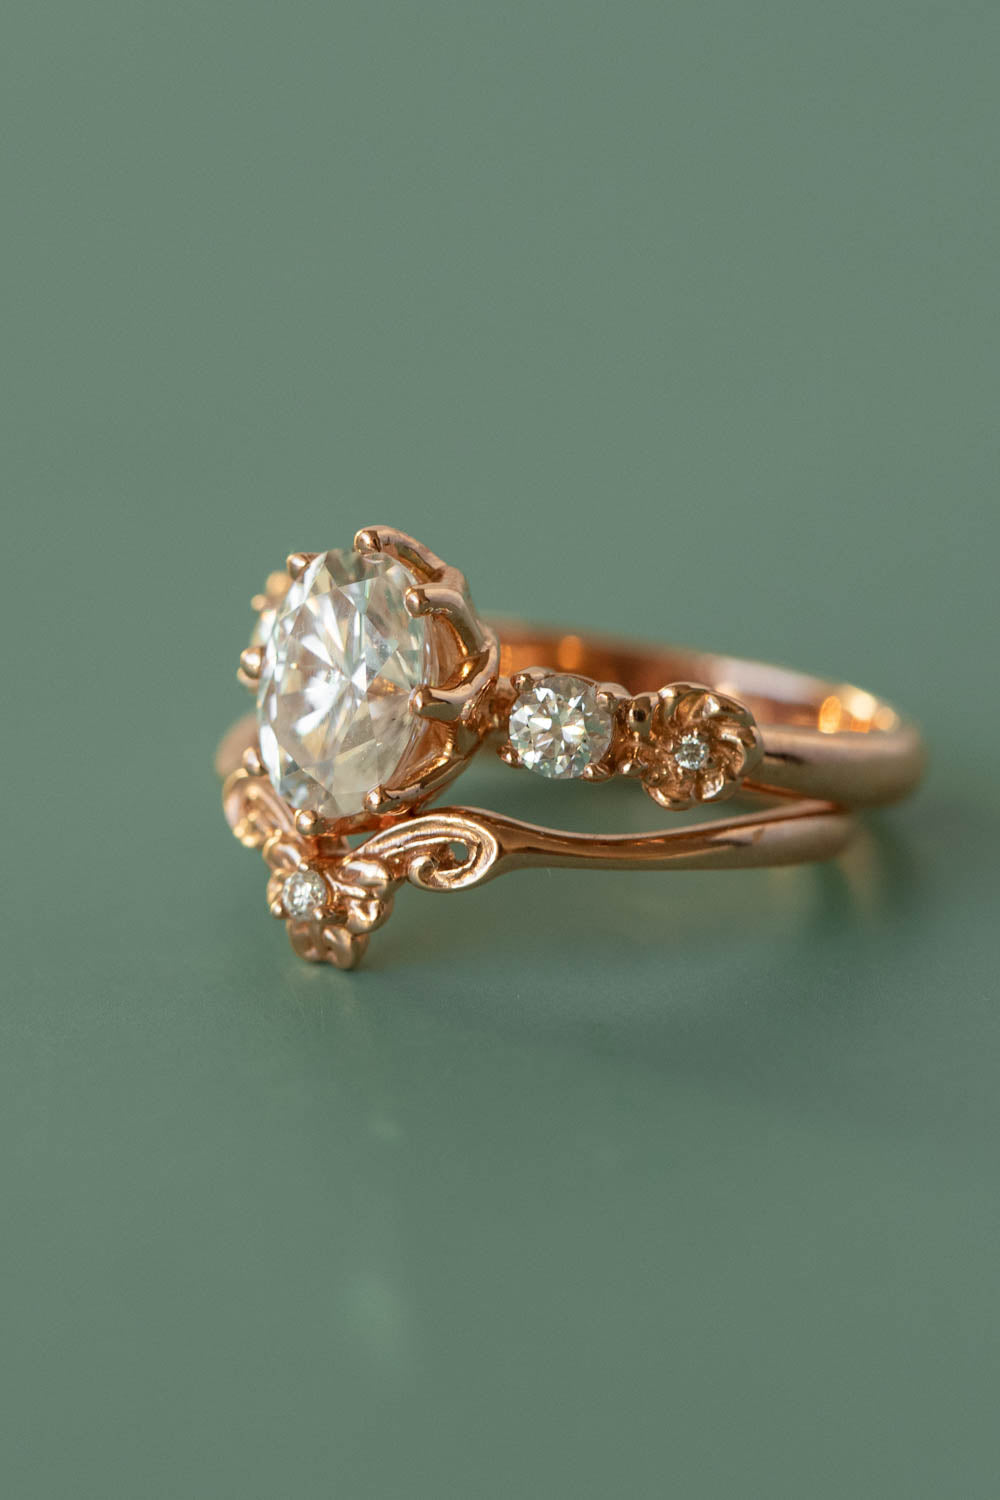 Oval lab grown diamond bridal ring set, floral rose gold engagement ring with diamonds  / Fiorella - Eden Garden Jewelry™